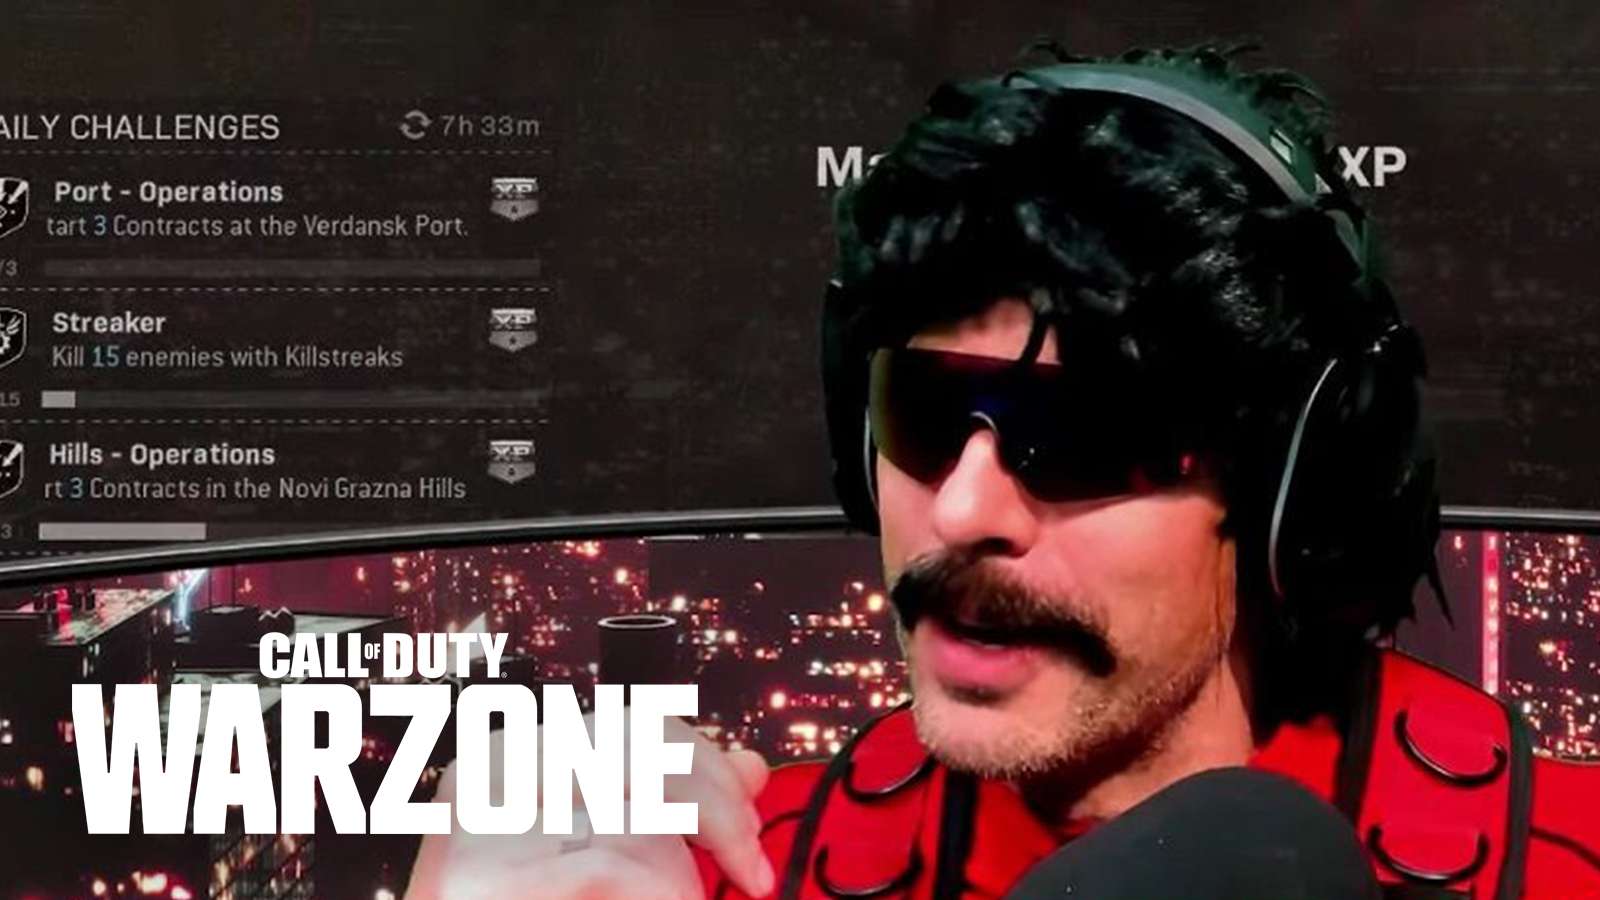 Dr Disrespect playing Call of Duty Warzone on YouTube.